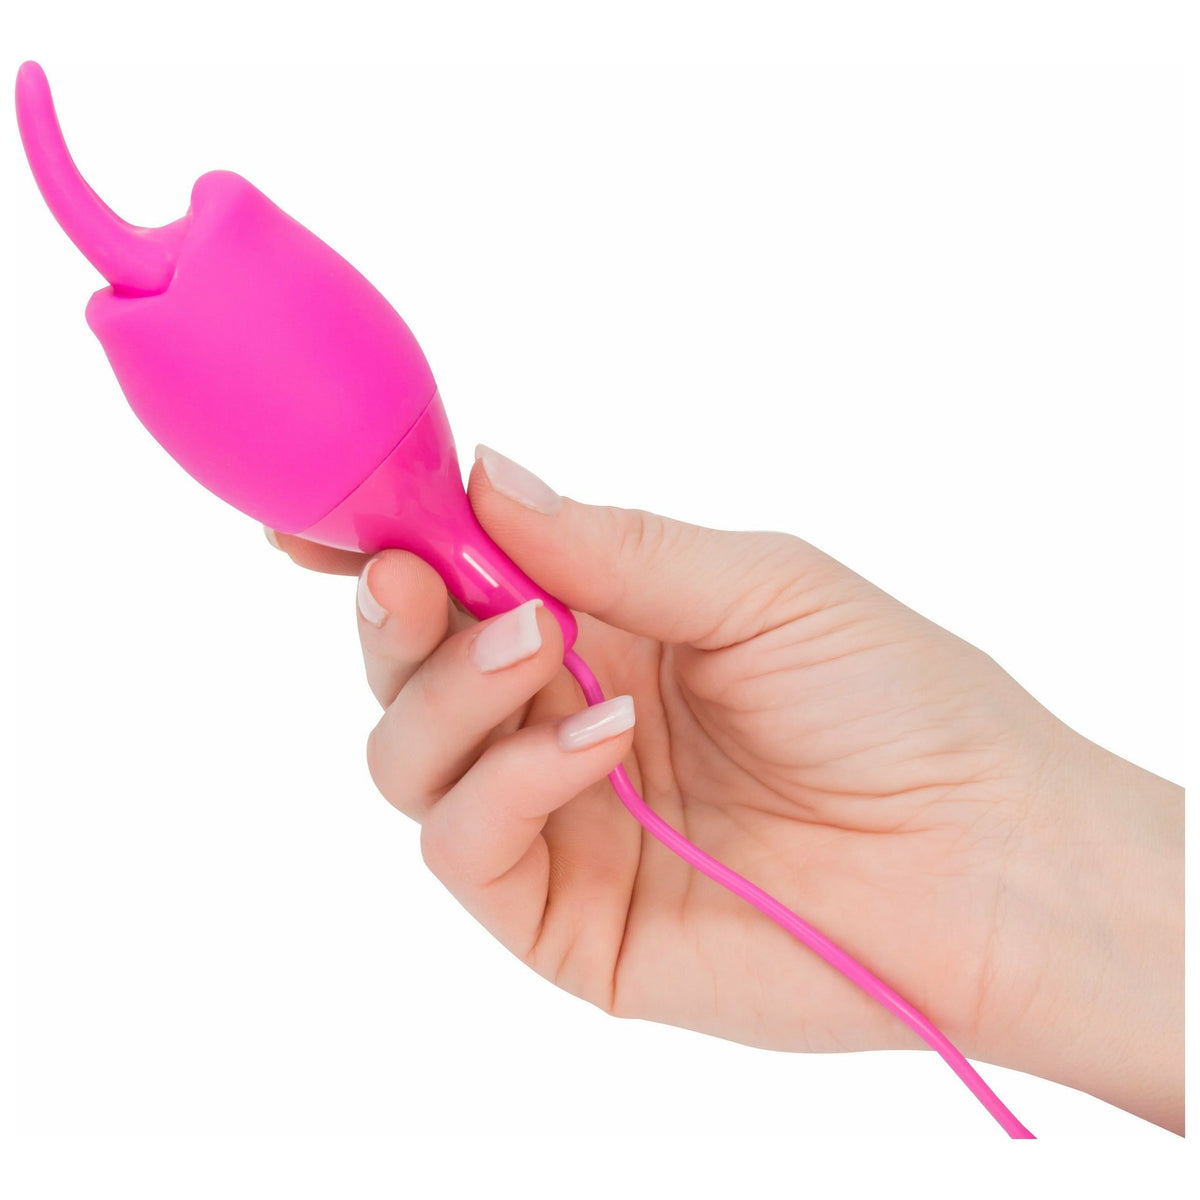 NMC Hold Tight - Tongue Vibrator - Rechargeable - Pink